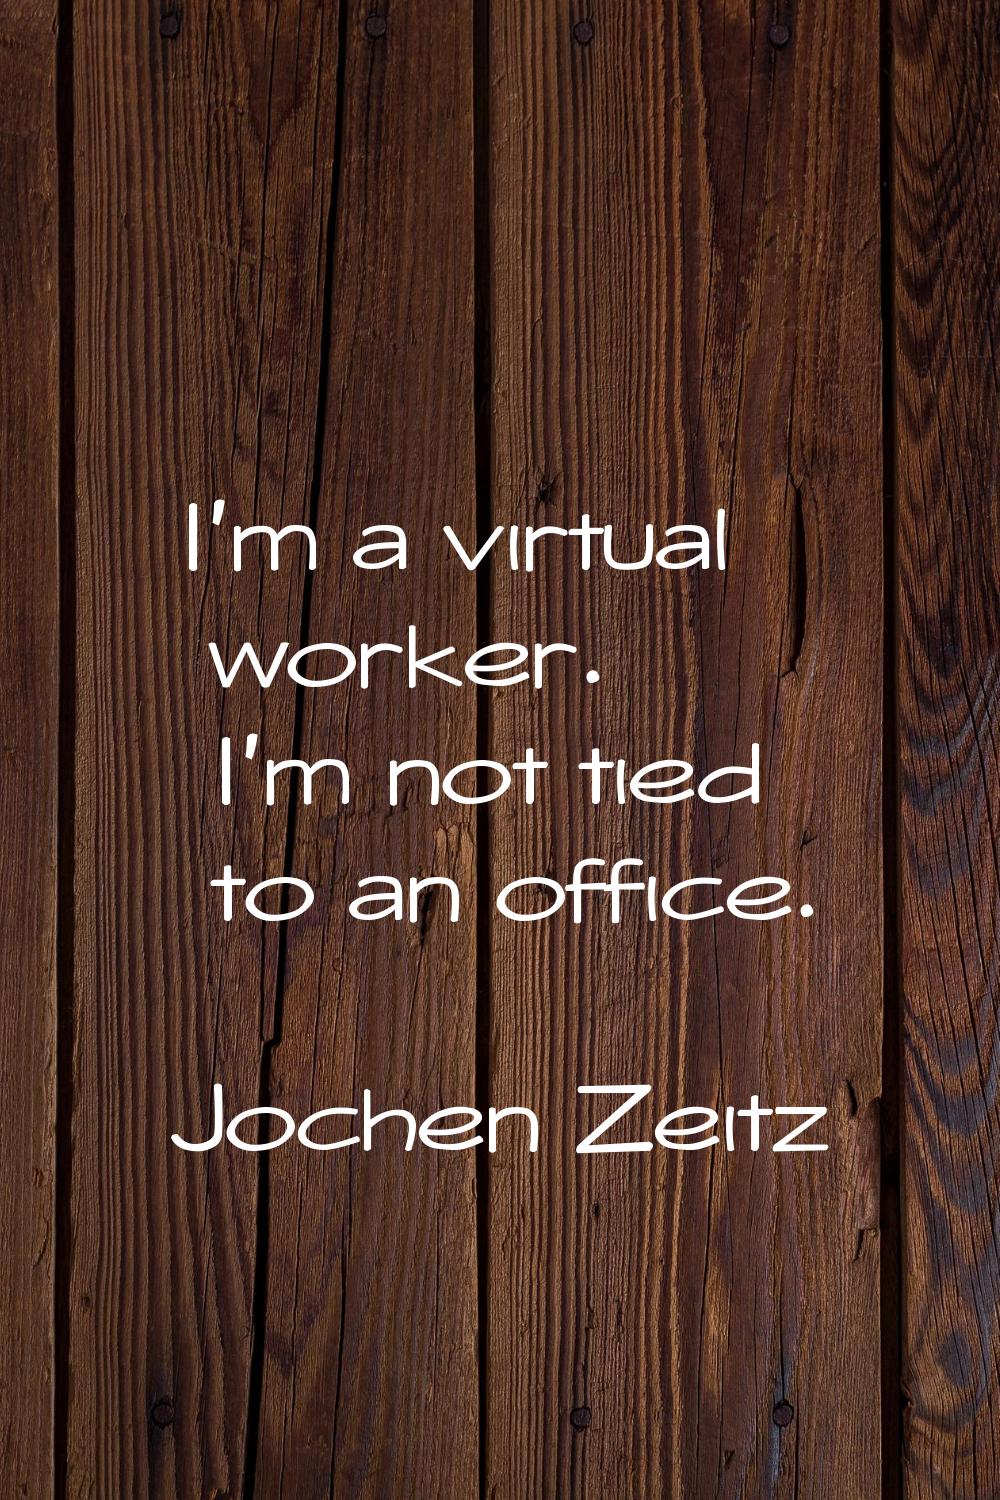 I'm a virtual worker. I'm not tied to an office.